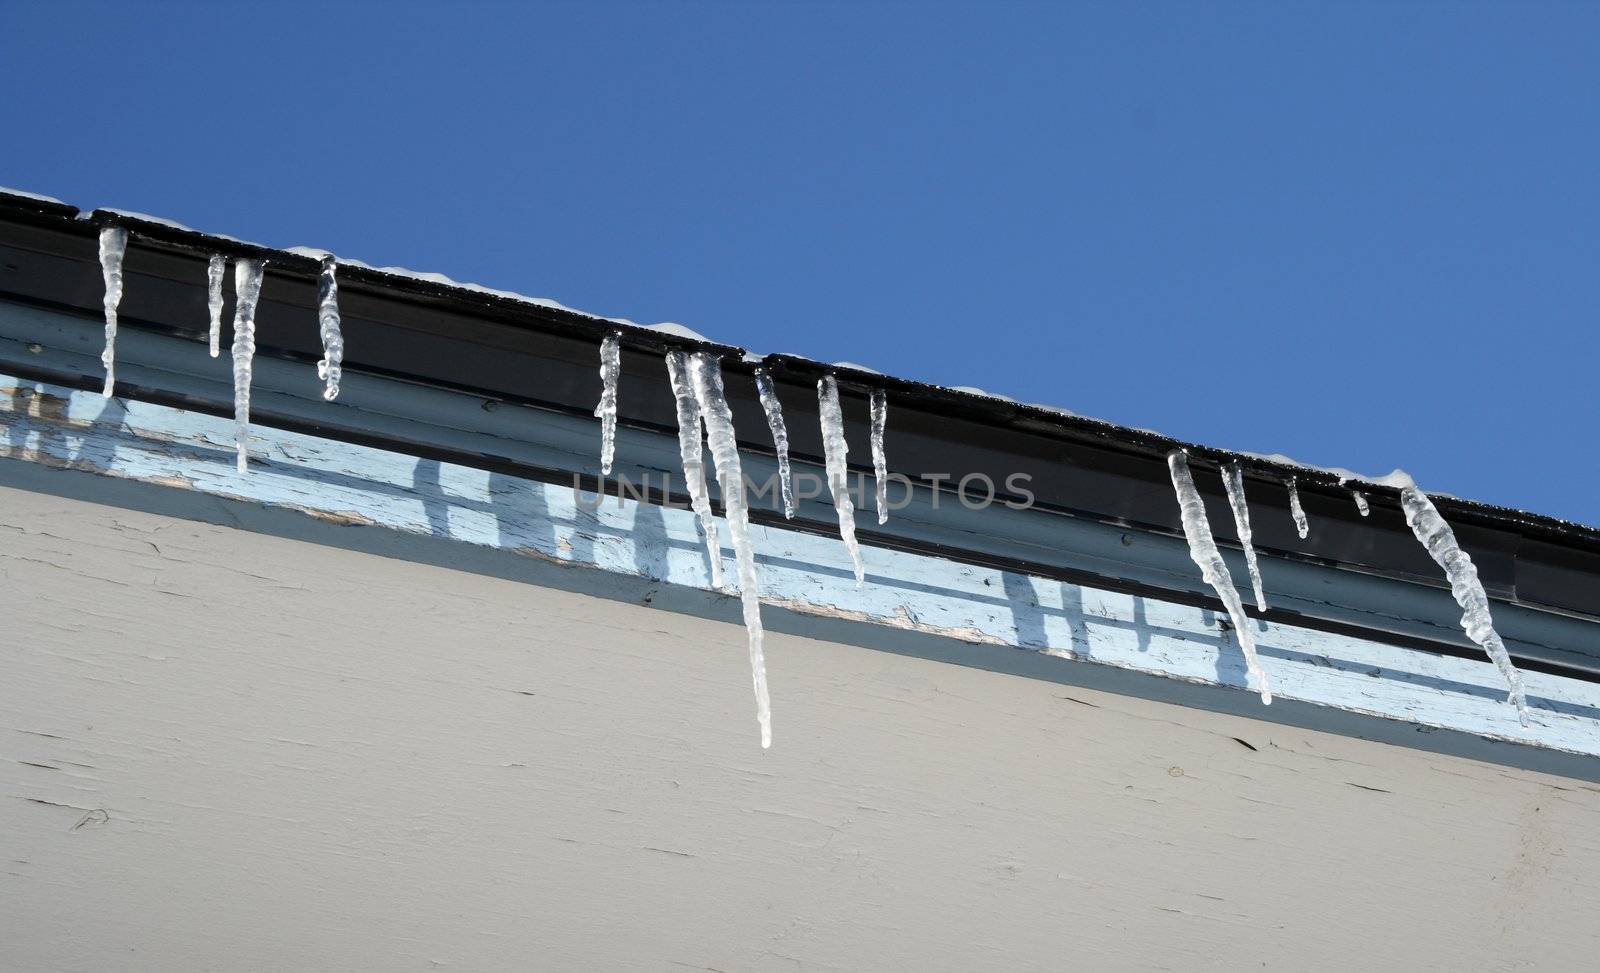 Spring is coming soon, icicles start melting�